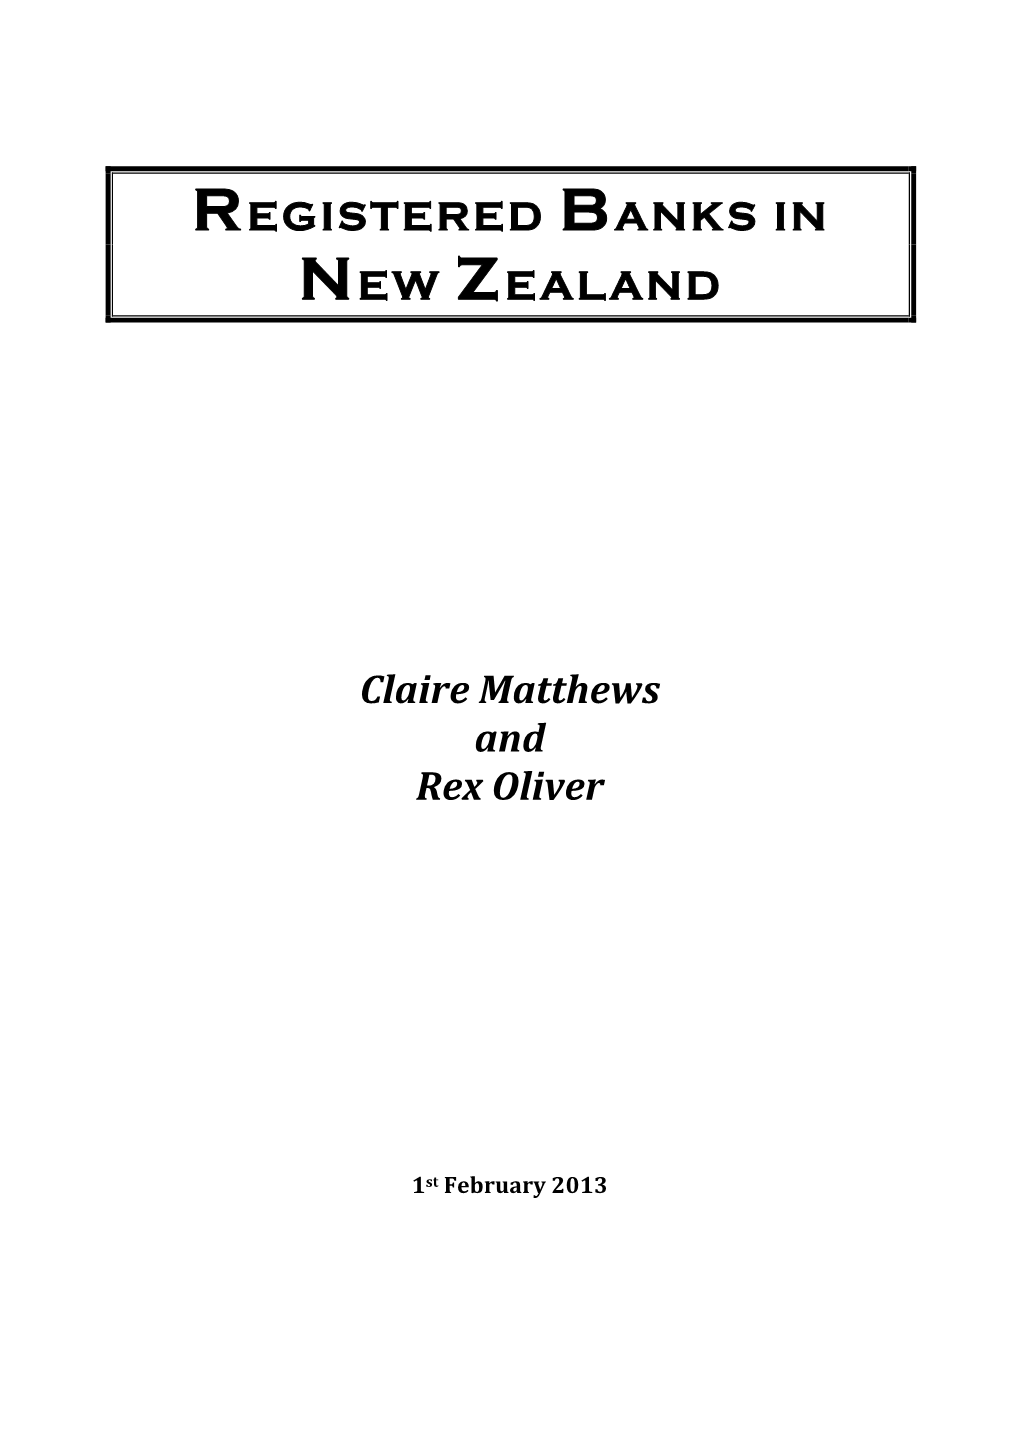 REGISTERED BANKS in NEW ZEALAND Claire Matthews Rex Oliver